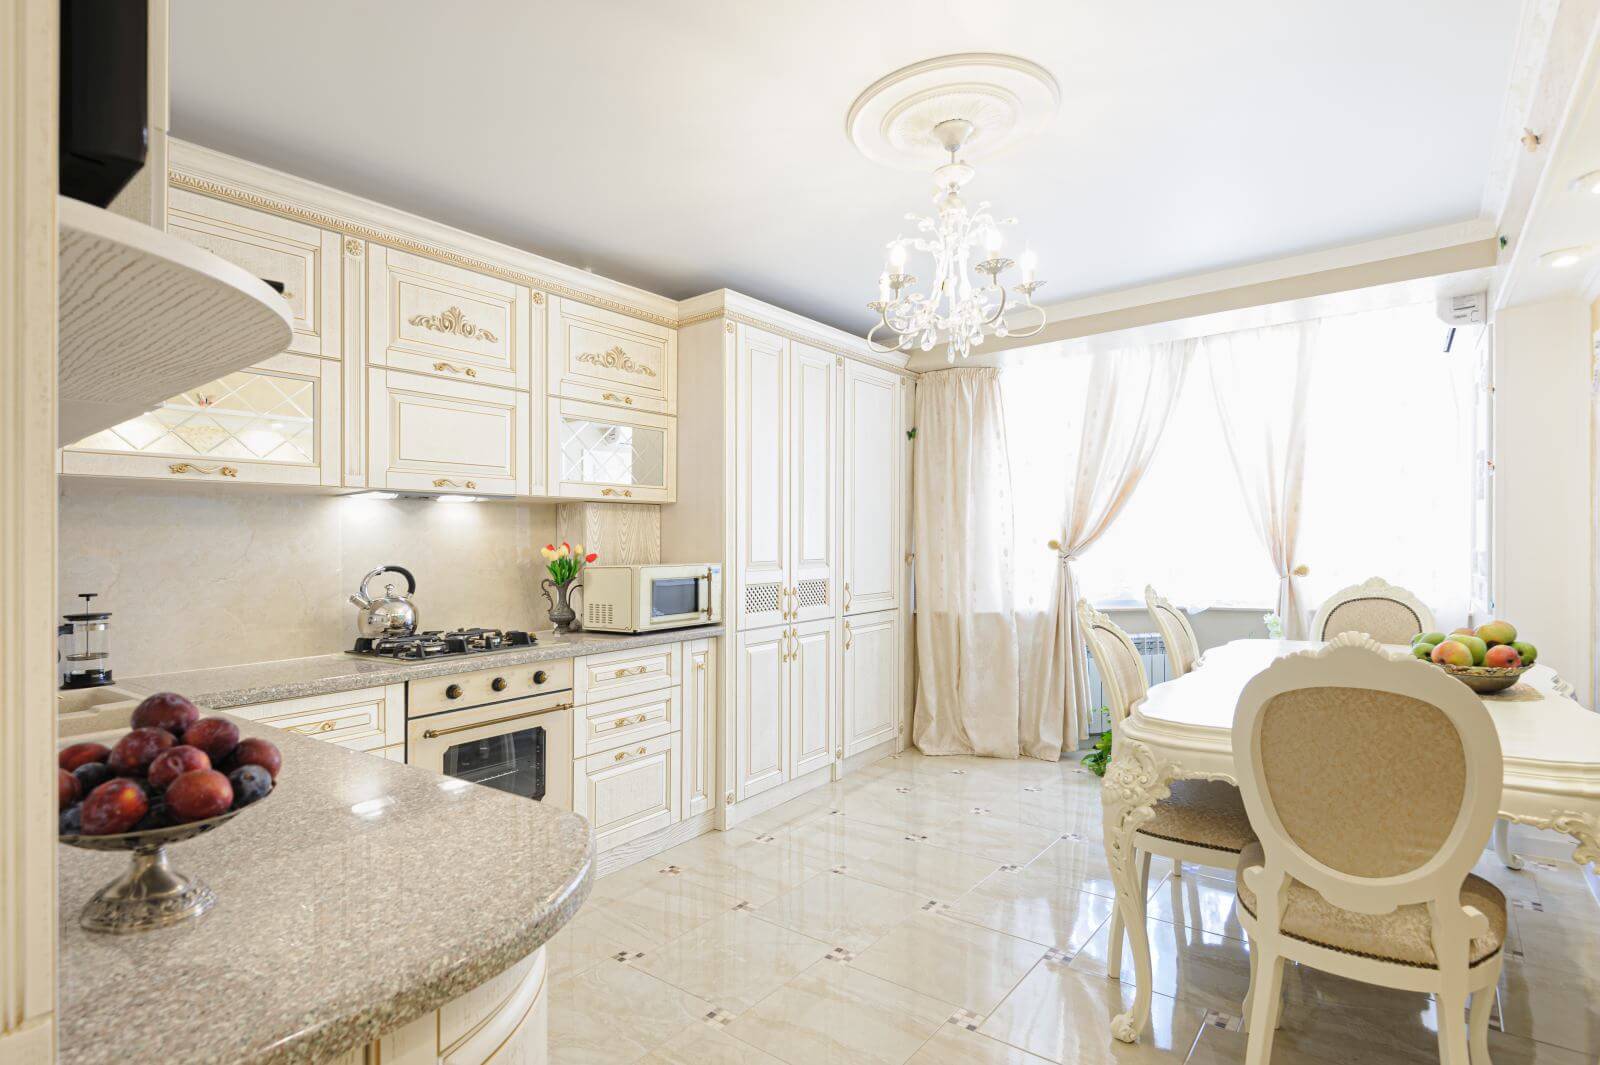 Luxury modern beige and cream colored kitchen in modern classic style.